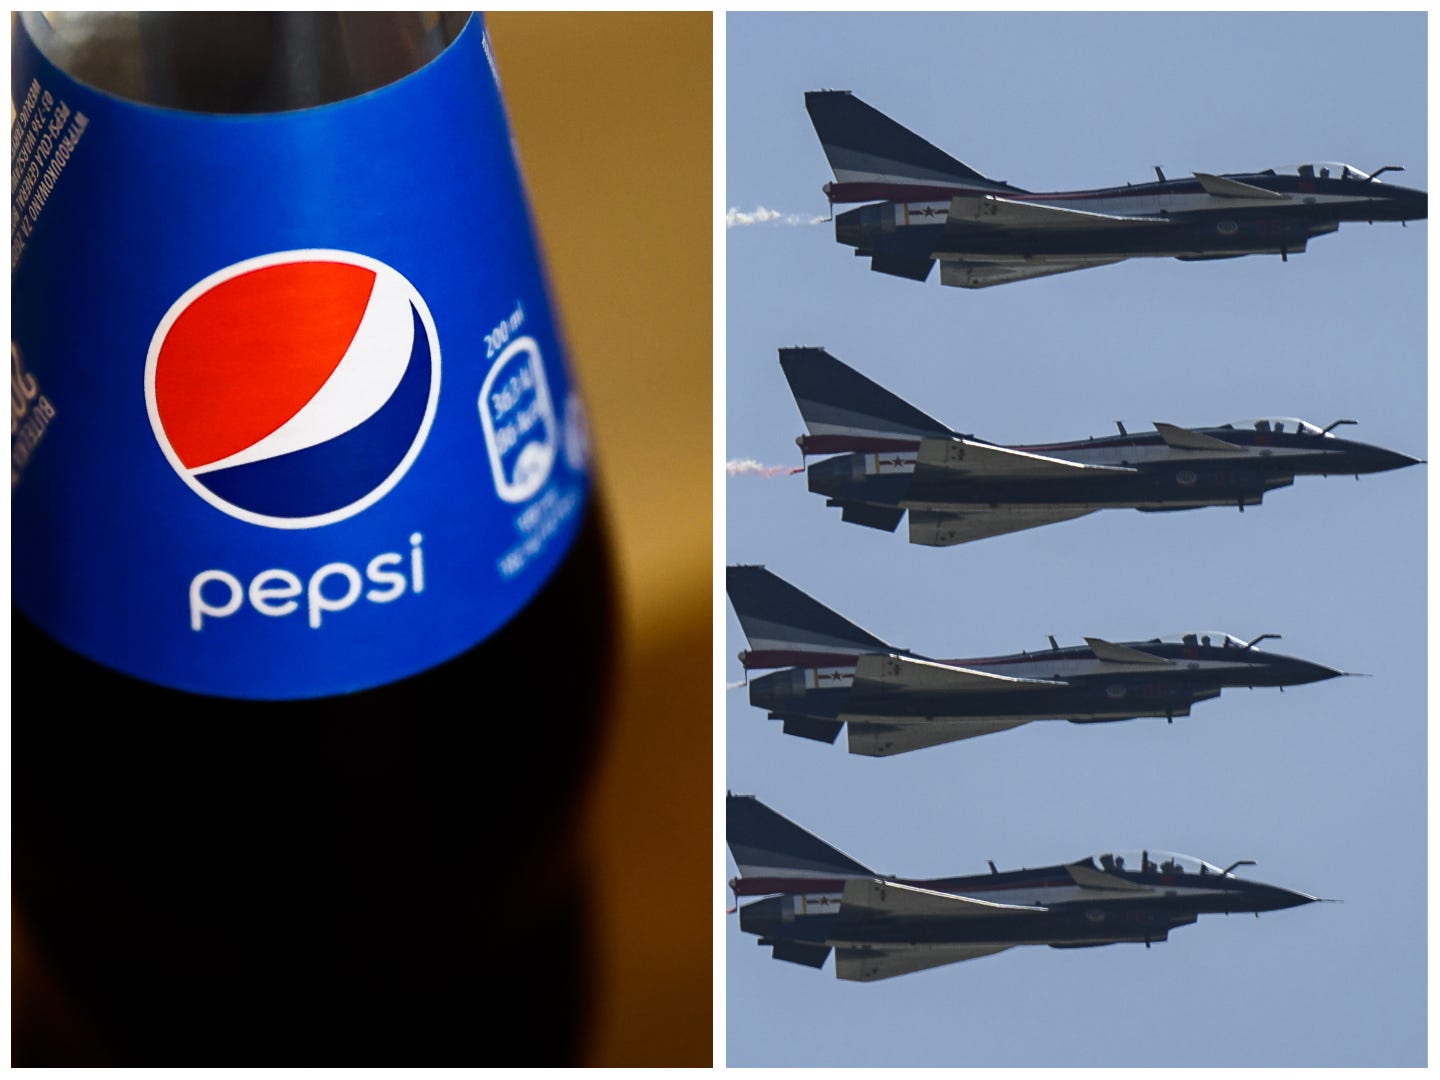 Pepsi Once Offered A Fighter Jet As A Joke Prize In A Promotion. A Student  Tried To Claim It Anyway.